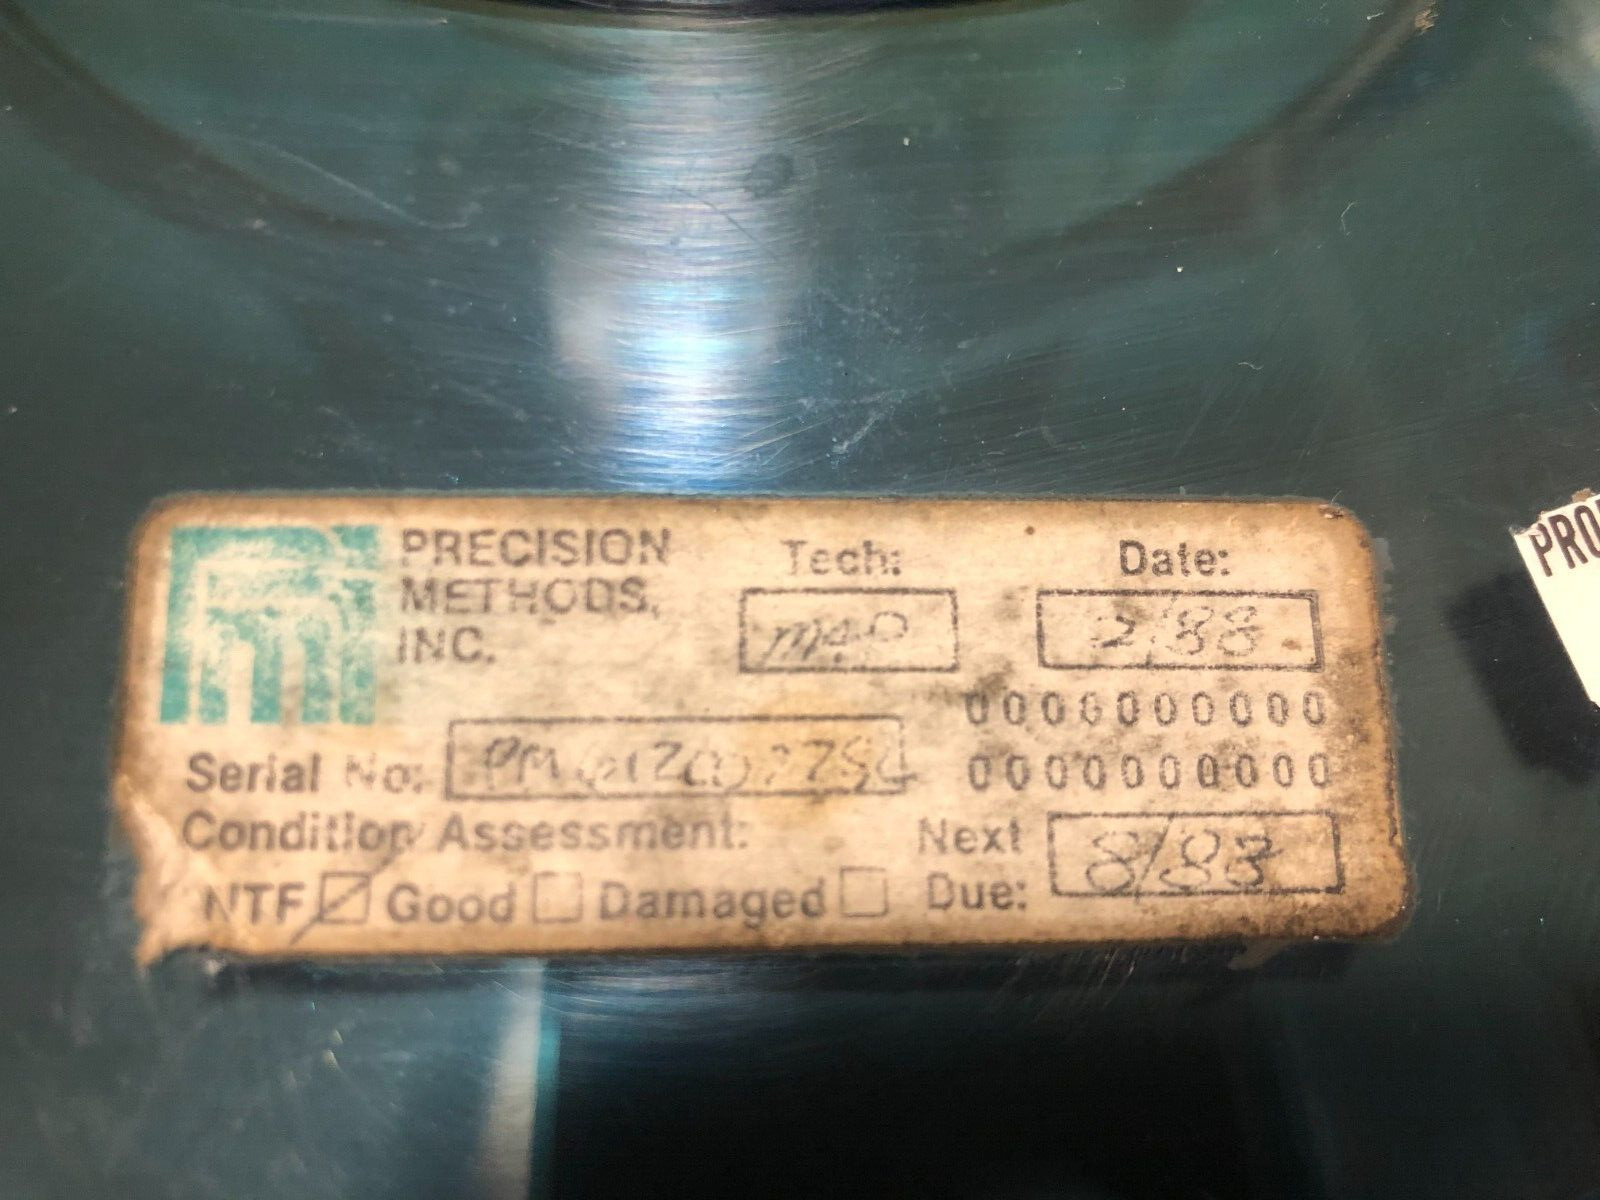 OWN A VERY RARE PIECE OF HISTORY - PRECISION METHODS  PM61200778L 80MB DATA DISK